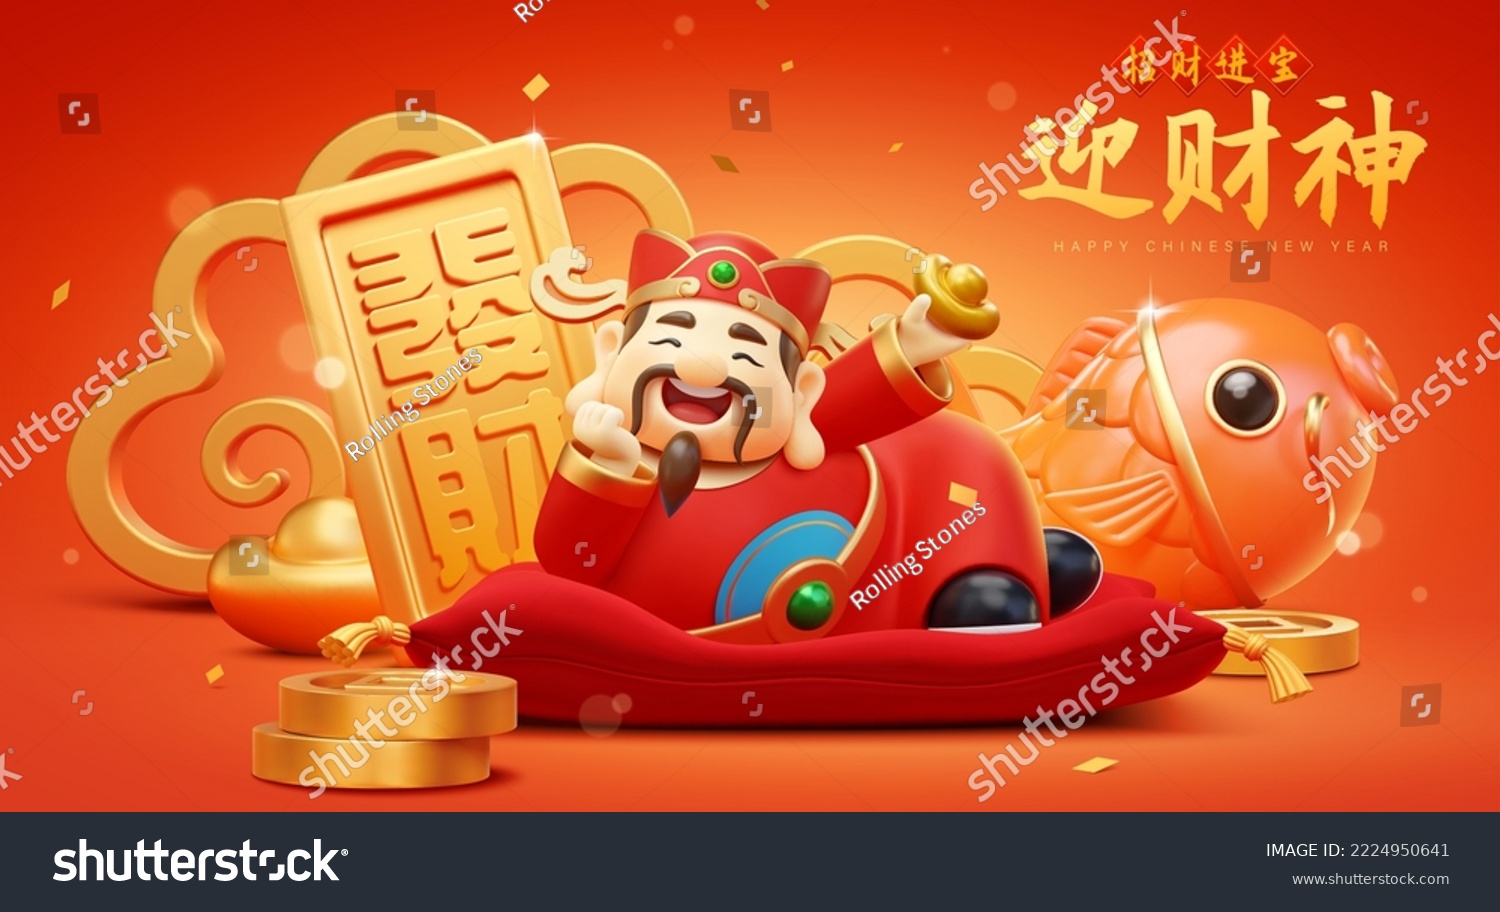 3d CNY poster. God of wealth laying on red cushion with koi fish and gold decorations in the back on red background. Text: Wishing wealth comes to you. Welcome Caishen. Prosperous. #2224950641